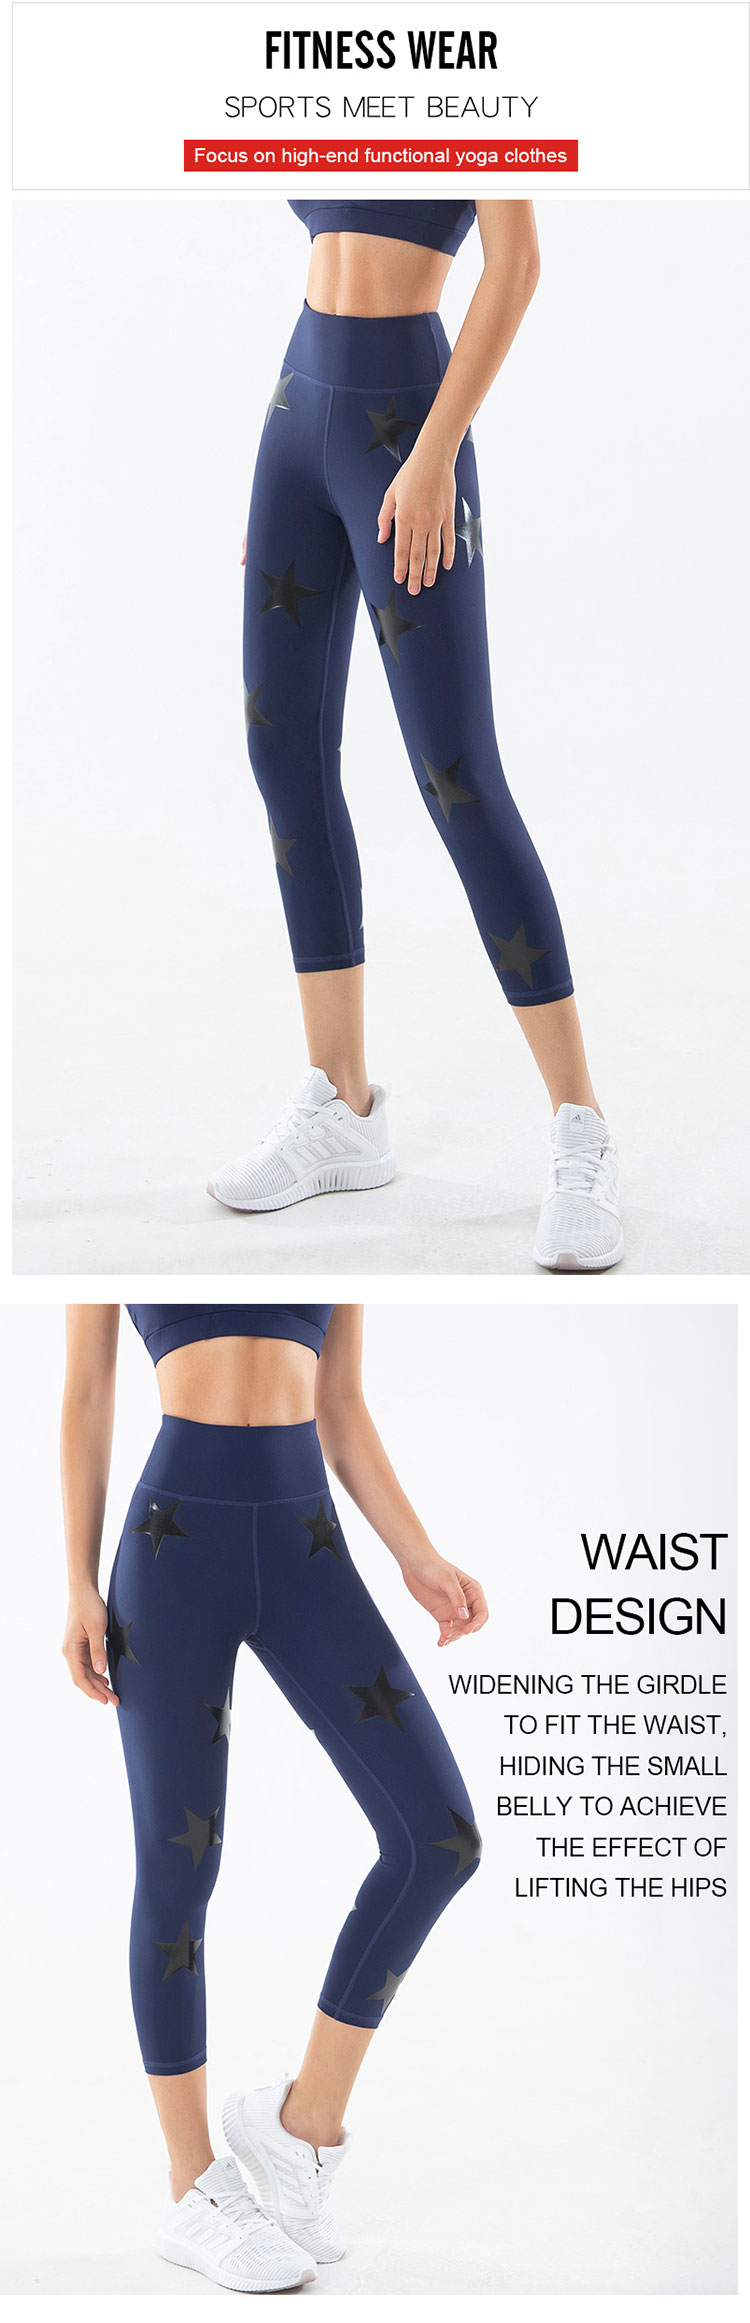 The-use-of-structure-is-a-top-priority-in-the-design-of-star-print-workout-leggings